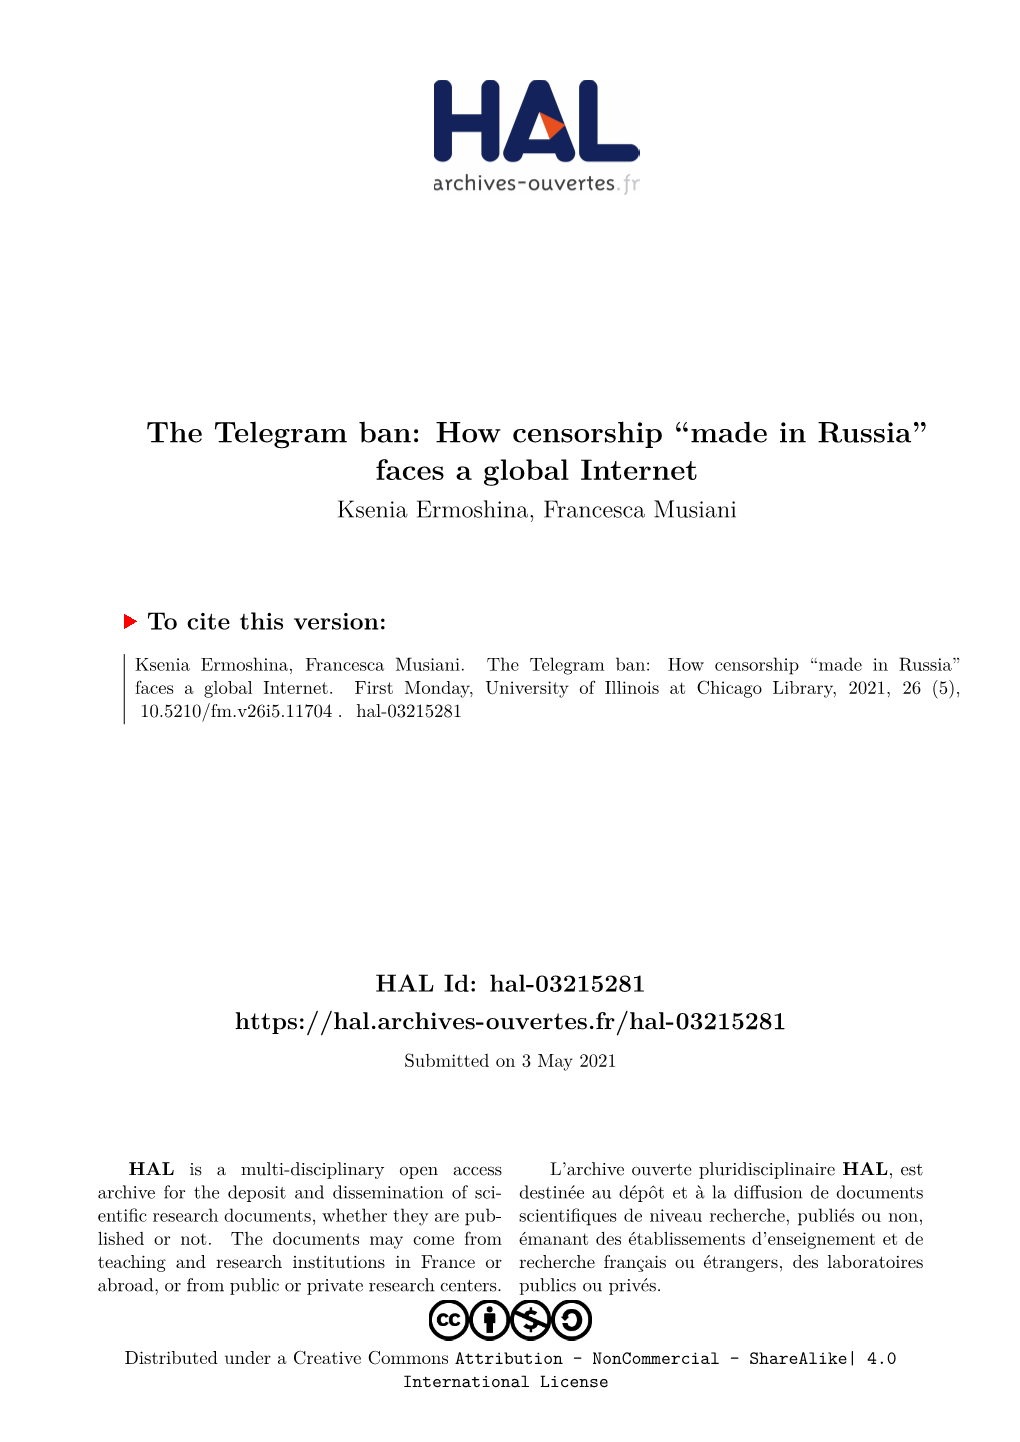 The Telegram Ban: How Censorship ``Made in Russia'' Faces a Global Internet